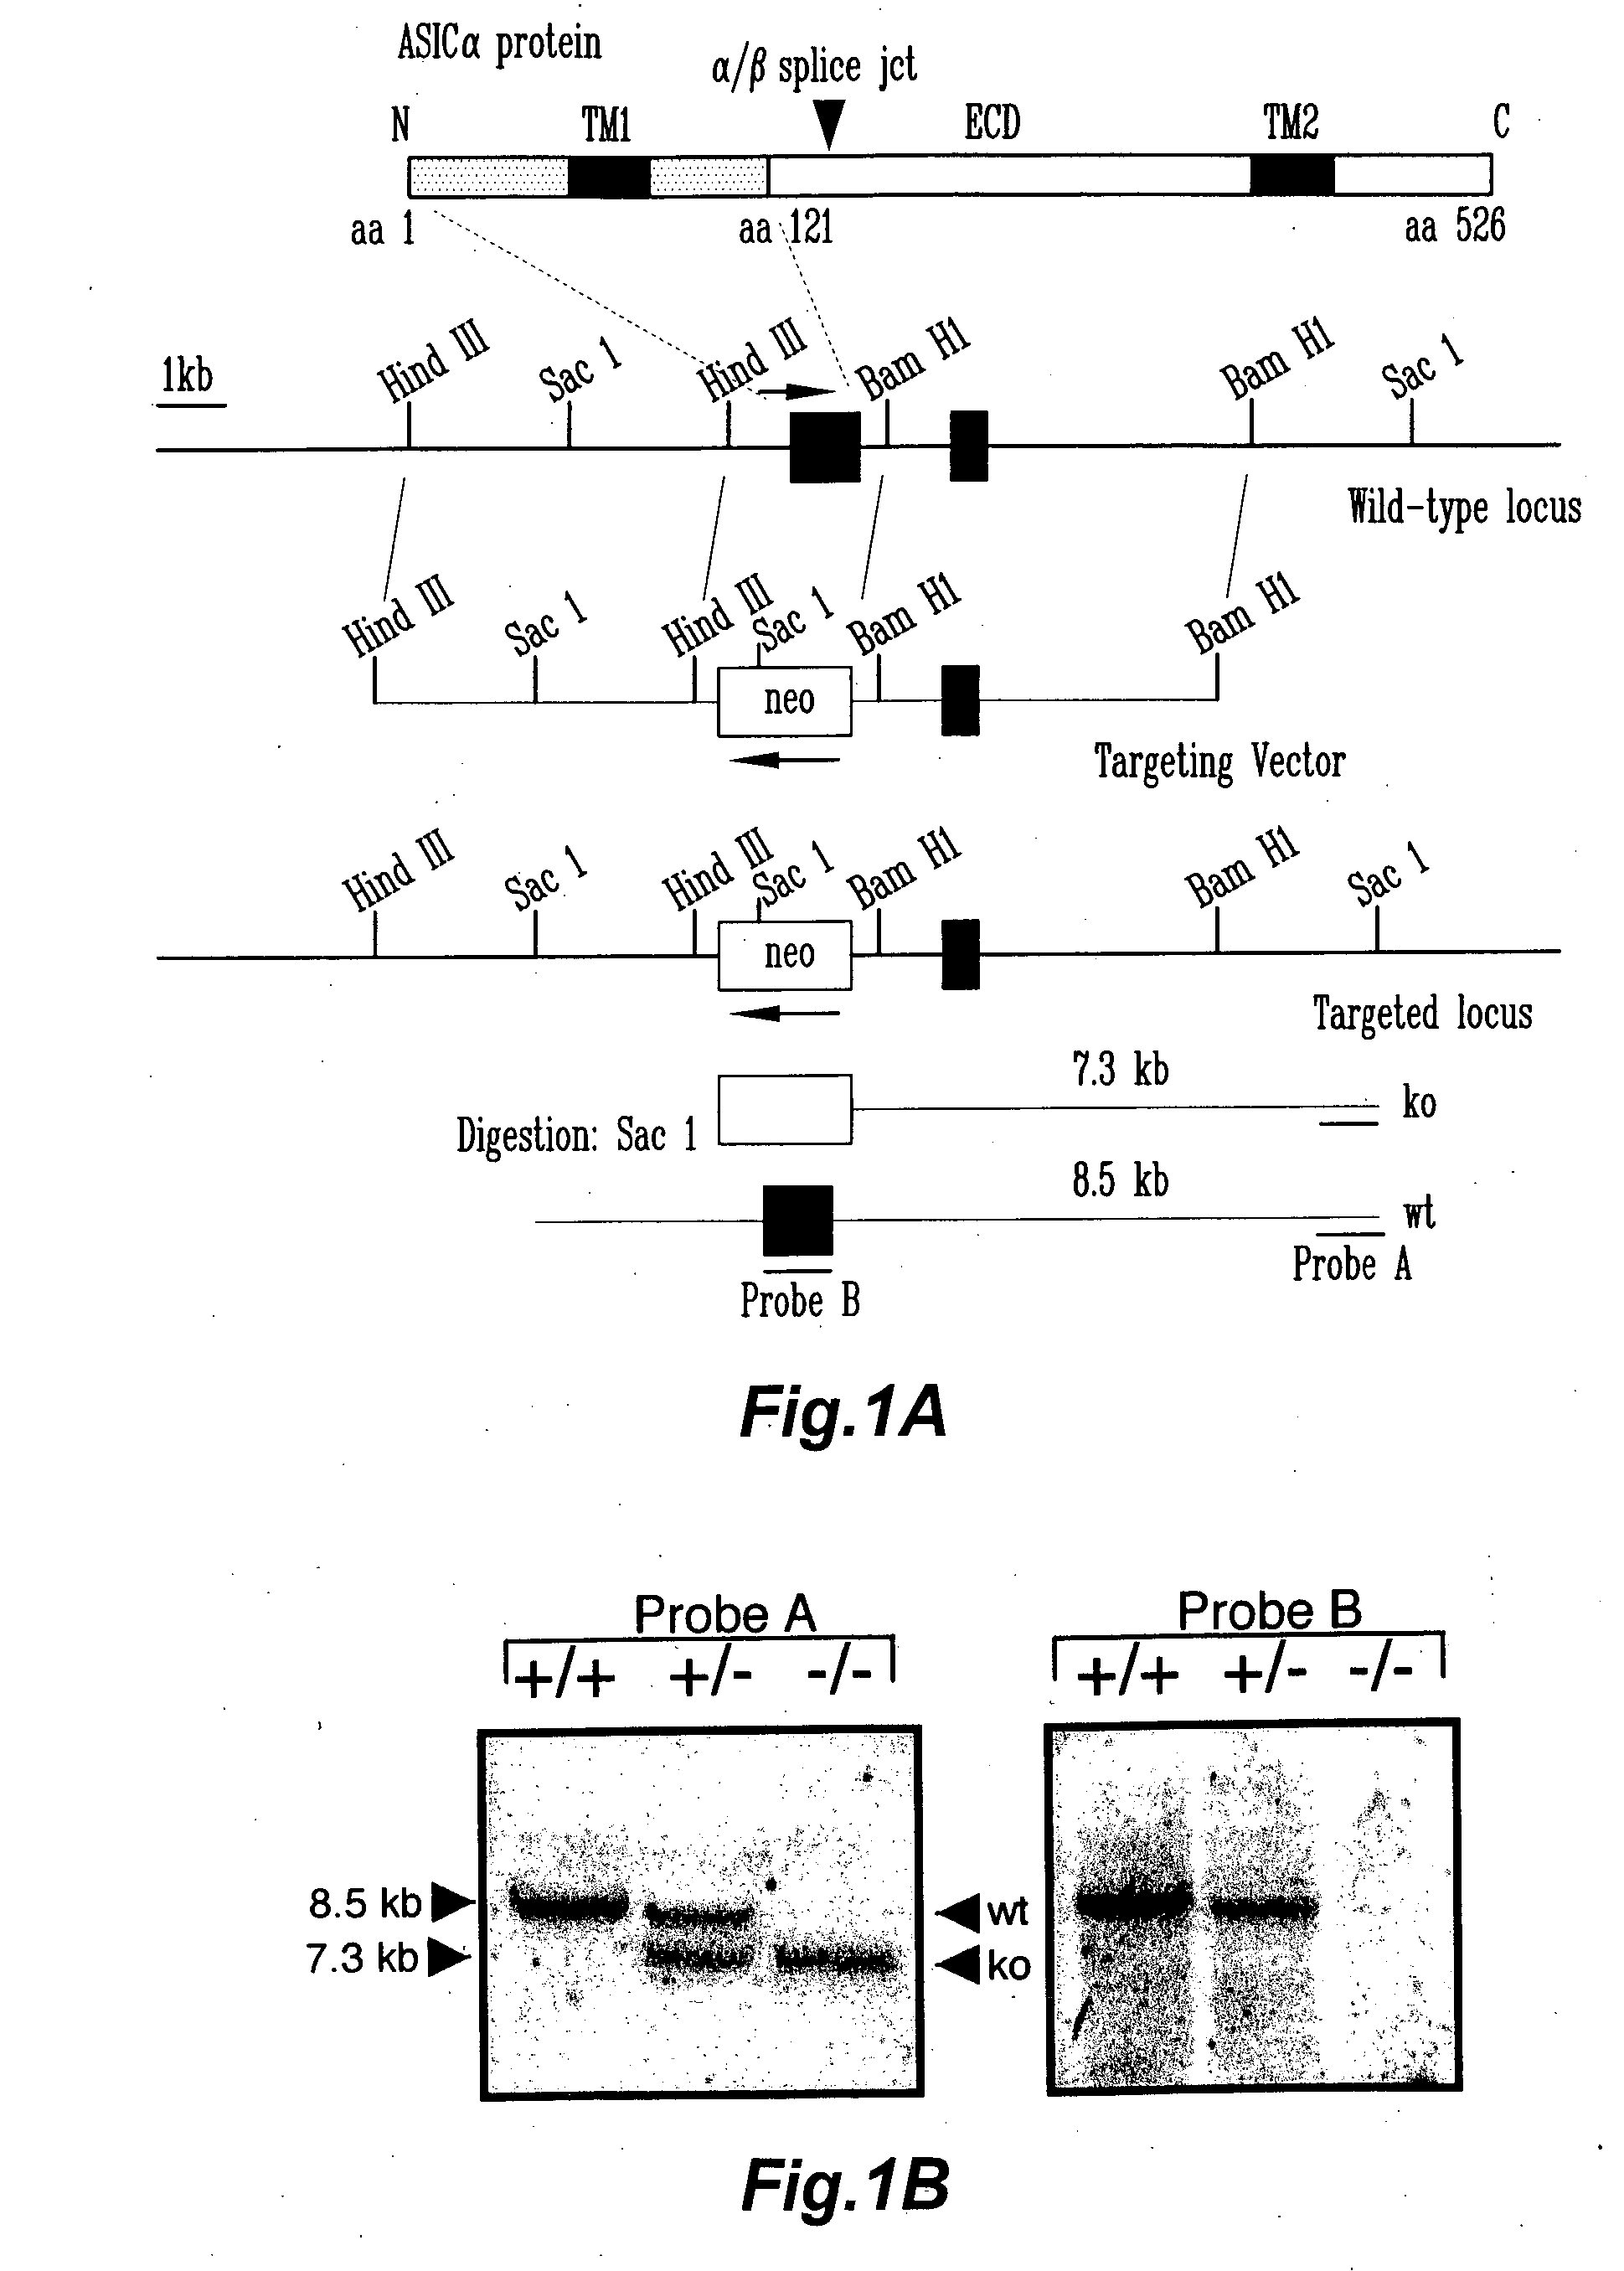 Novel compositions and methods for modulating the acid-sensing ion channel (ASIC)